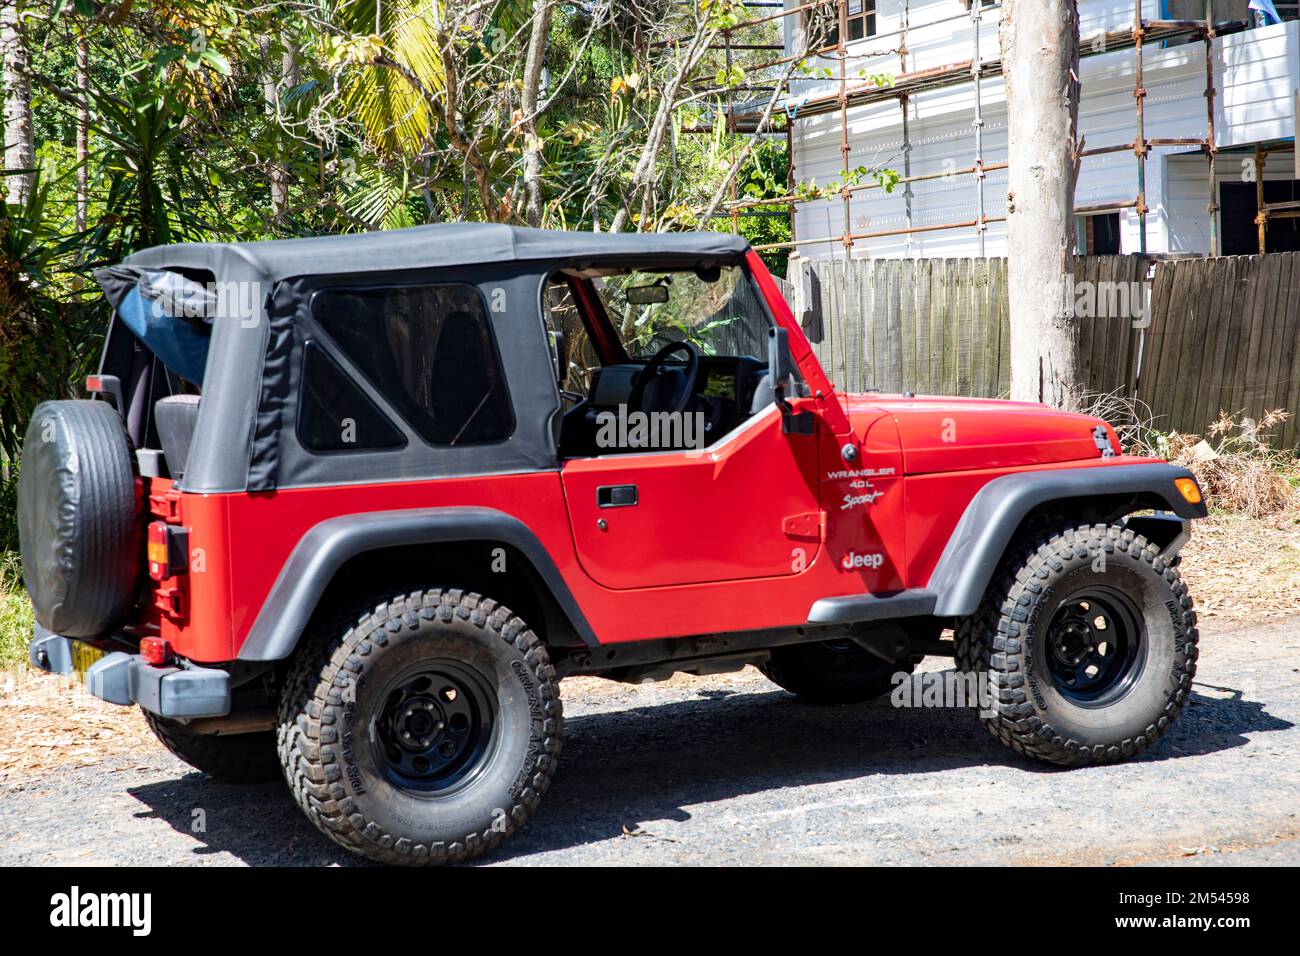 Jeep Wrangler Sport in red, model year 2000, parked in Palm Beach,Sydney,NSW,Australia Stock Photo